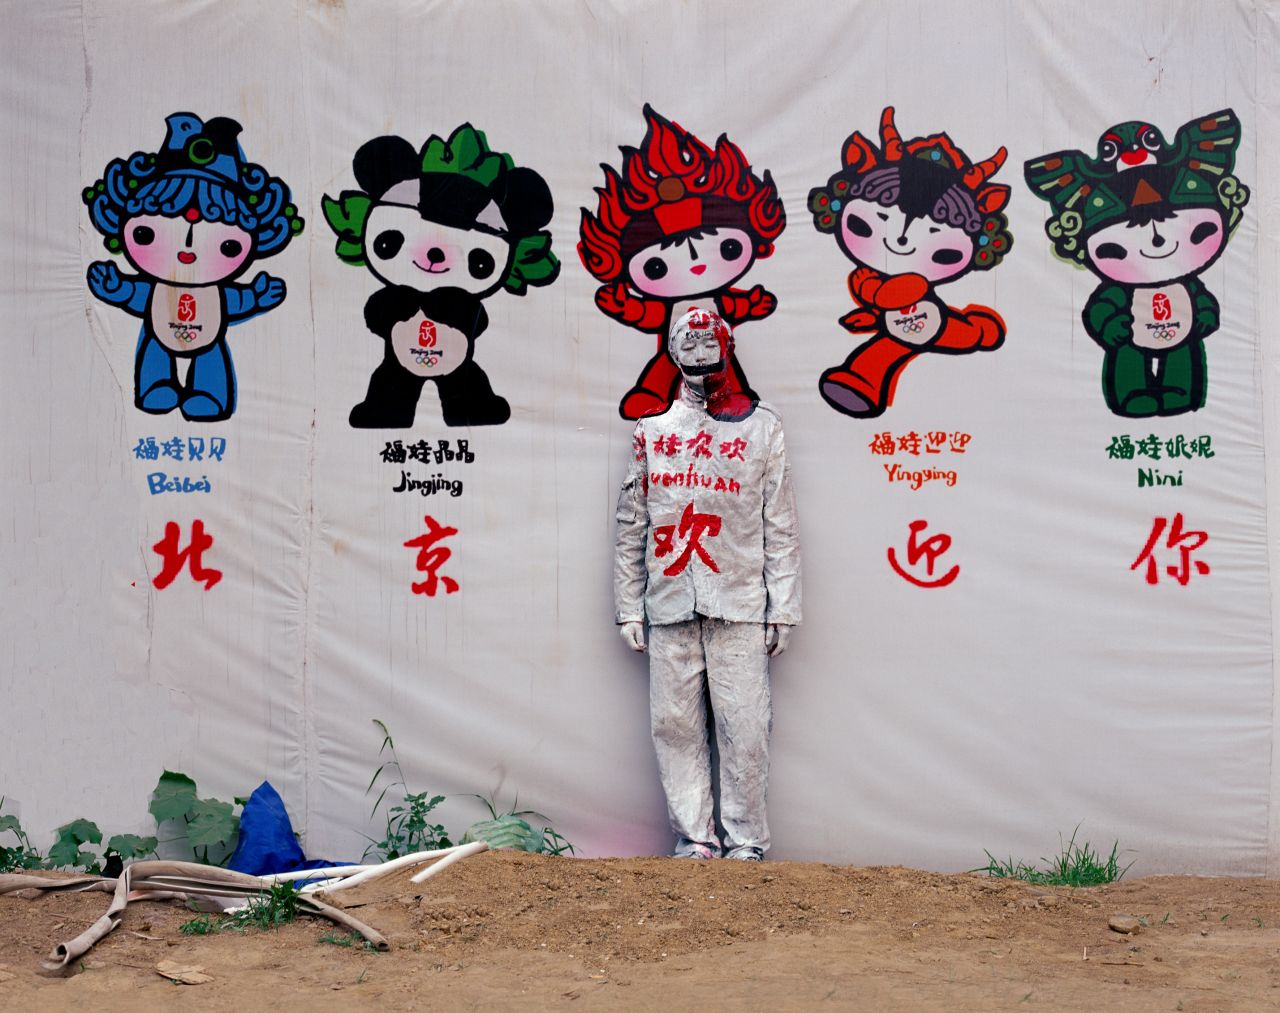 In an early work from 2006,  Liu painted himself to match the background of 2008 Beijing Olympics mascots that began appearing throughout the city. Huge swaths of the city's old hutongs were torn down to make way for the event. 